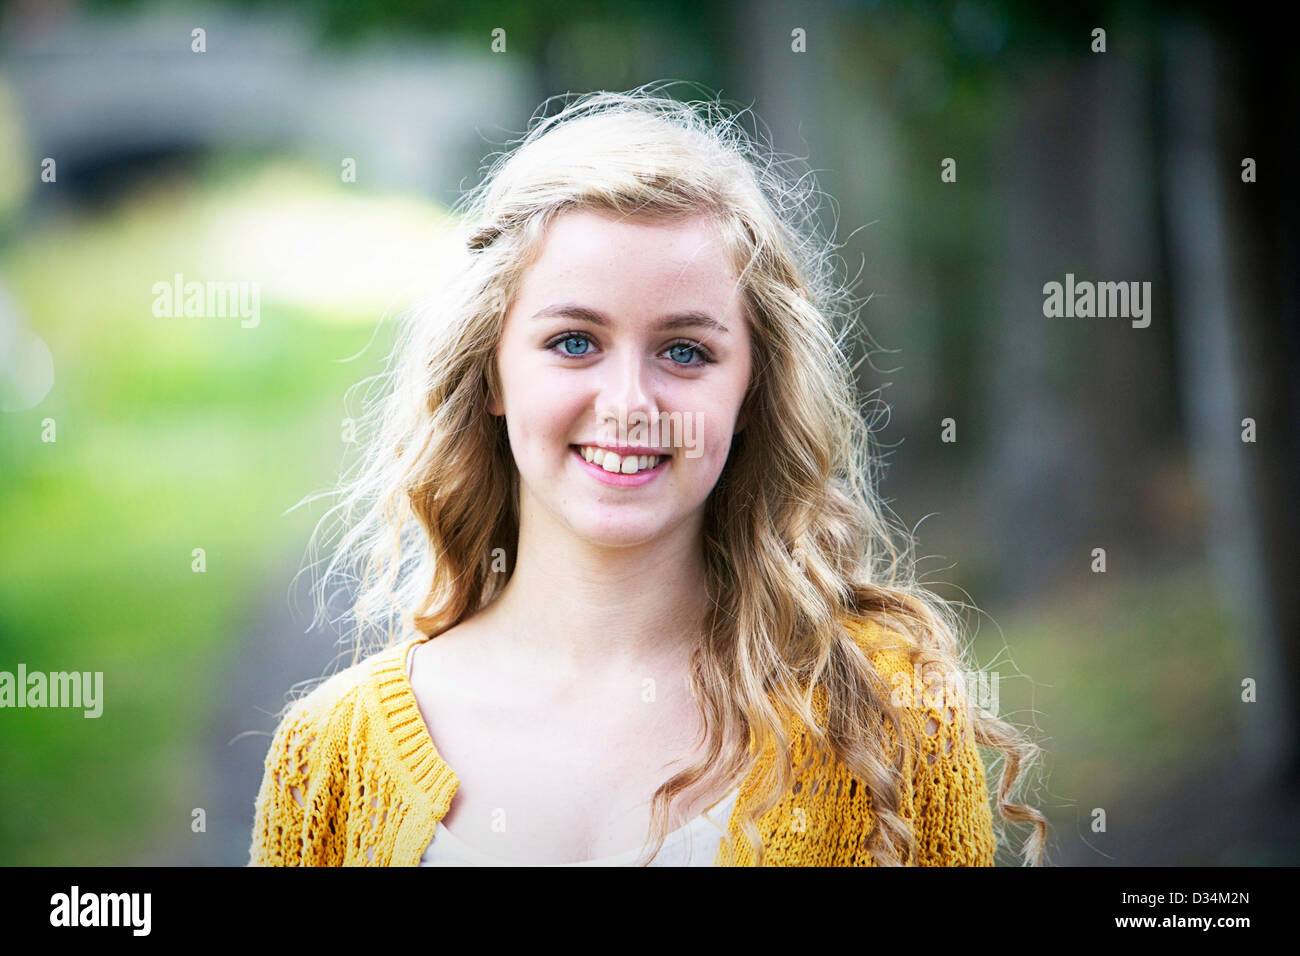 Young adult blond girl headshot Stock Photo